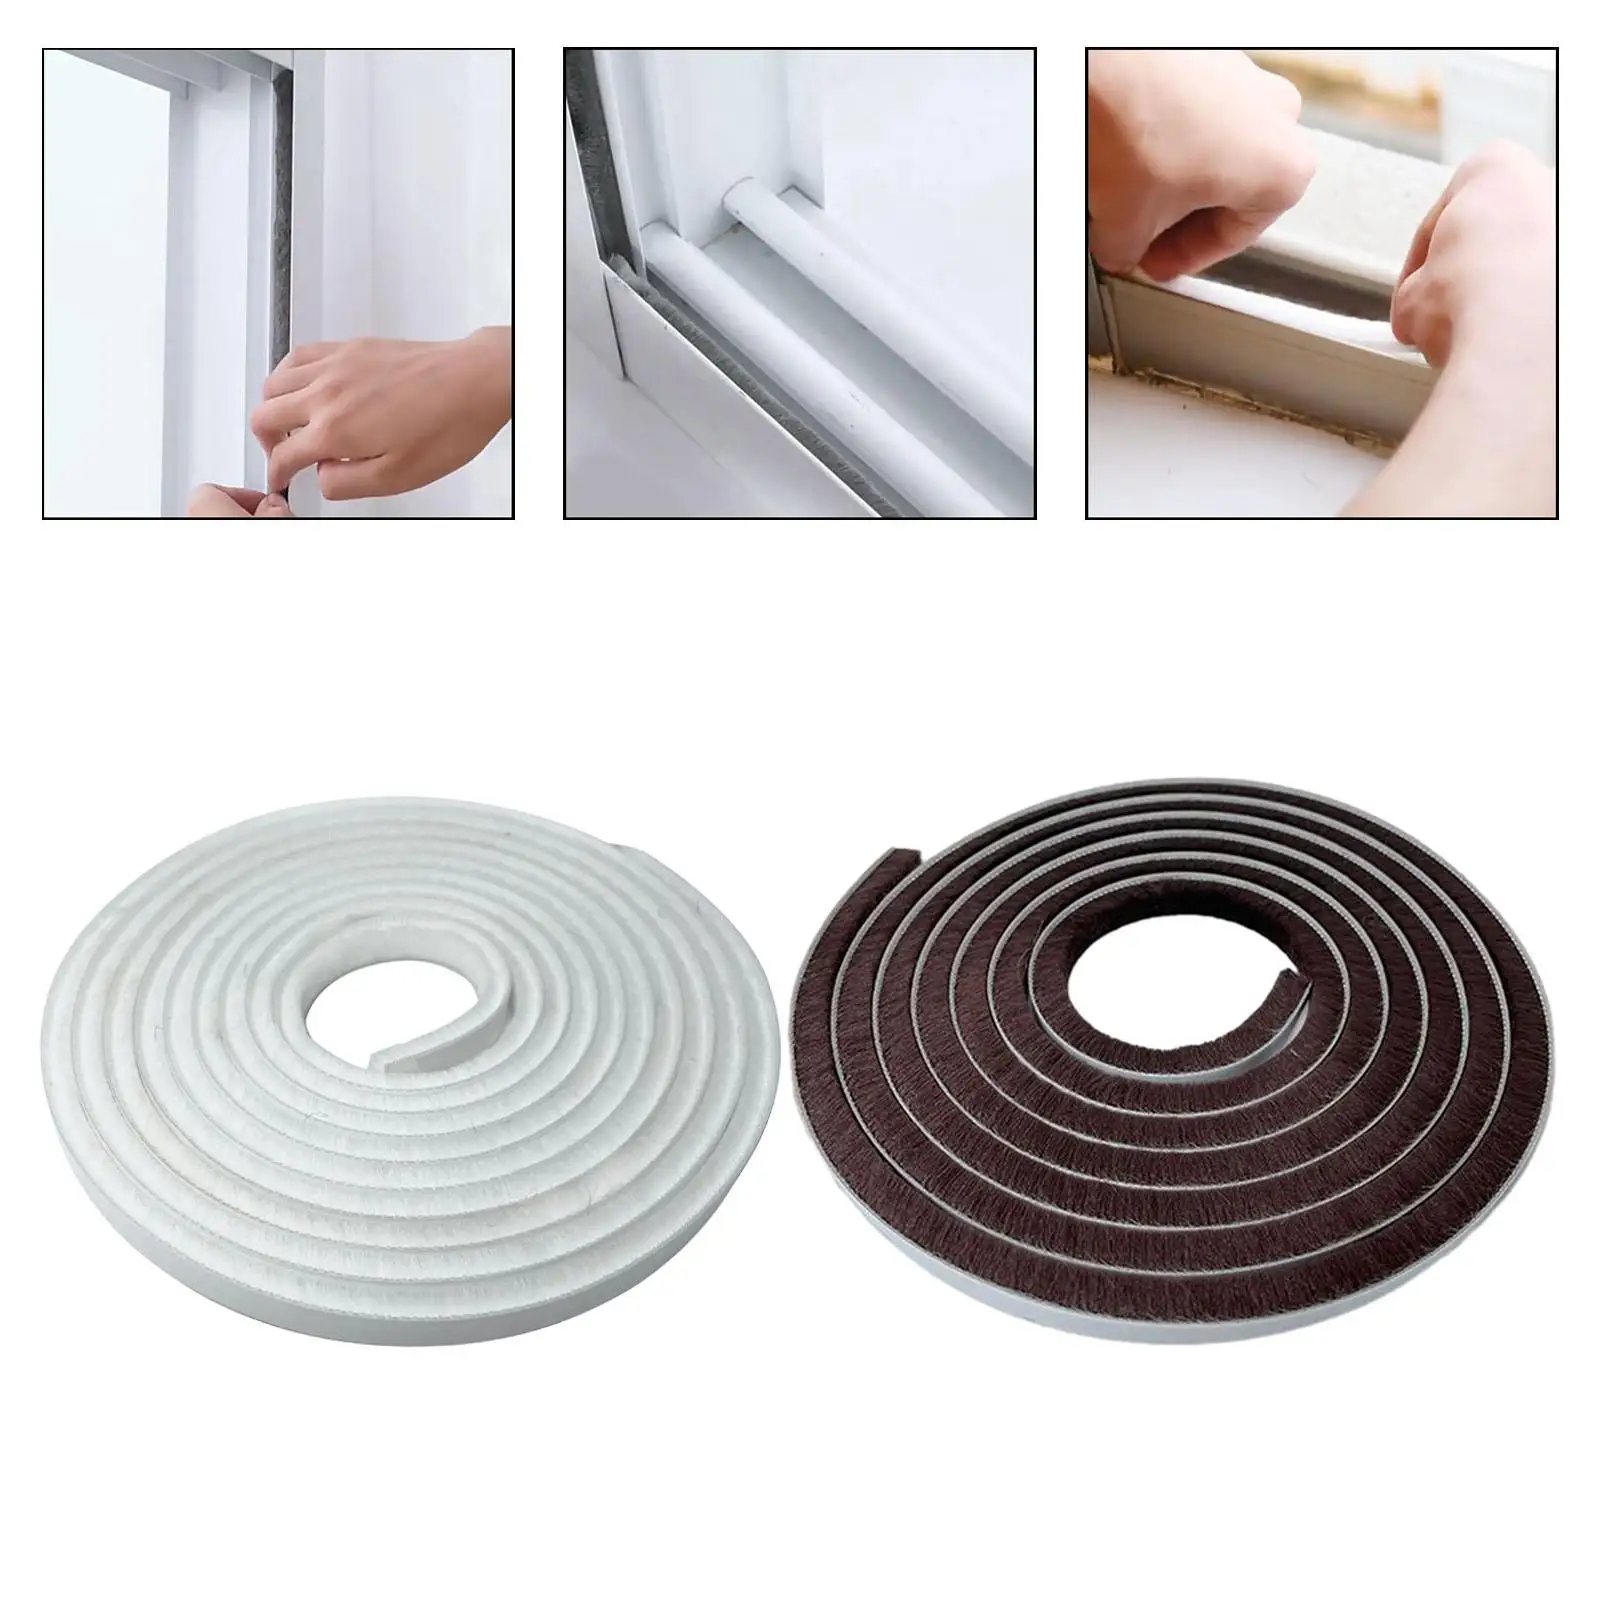 Weather Stripping Dustproof Insulation Soundproofing Brush Seal Weatherstripping Sealing Tape for Sliding Doors Wardrobe